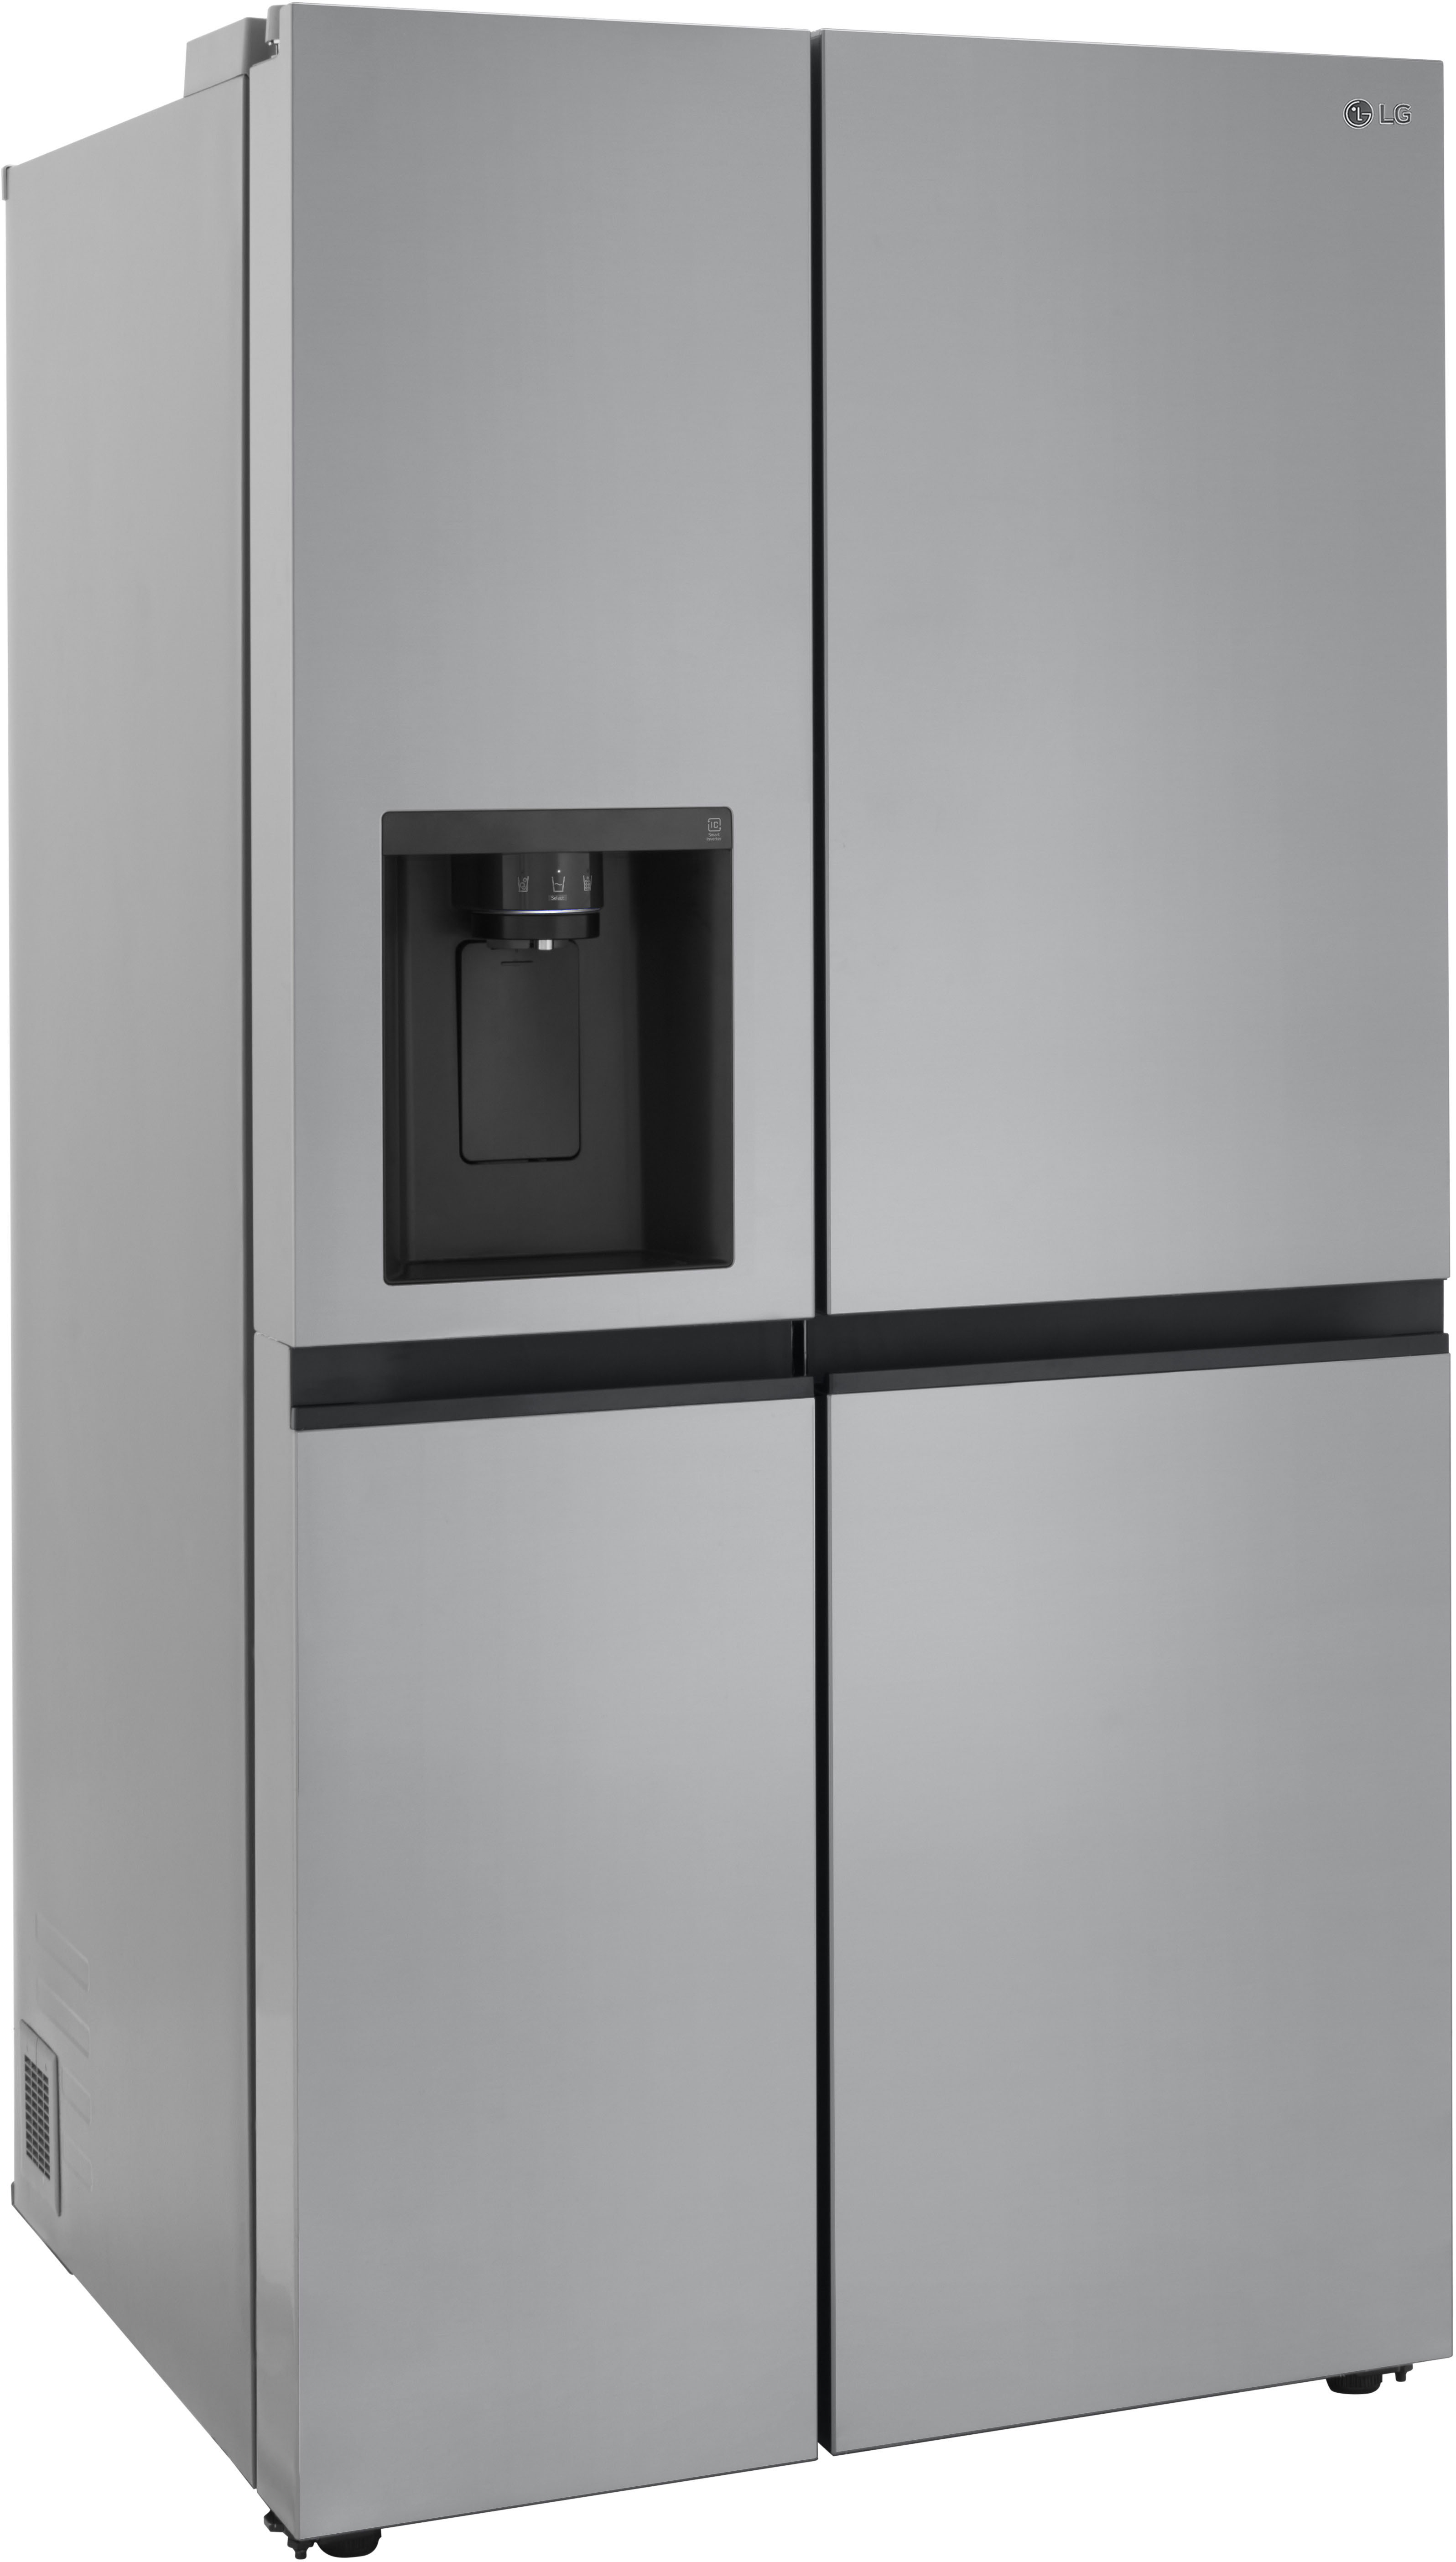 Left View: Fulgor Milano - Milano Stainless Steel French Door Refrigerator without Handle - Silver